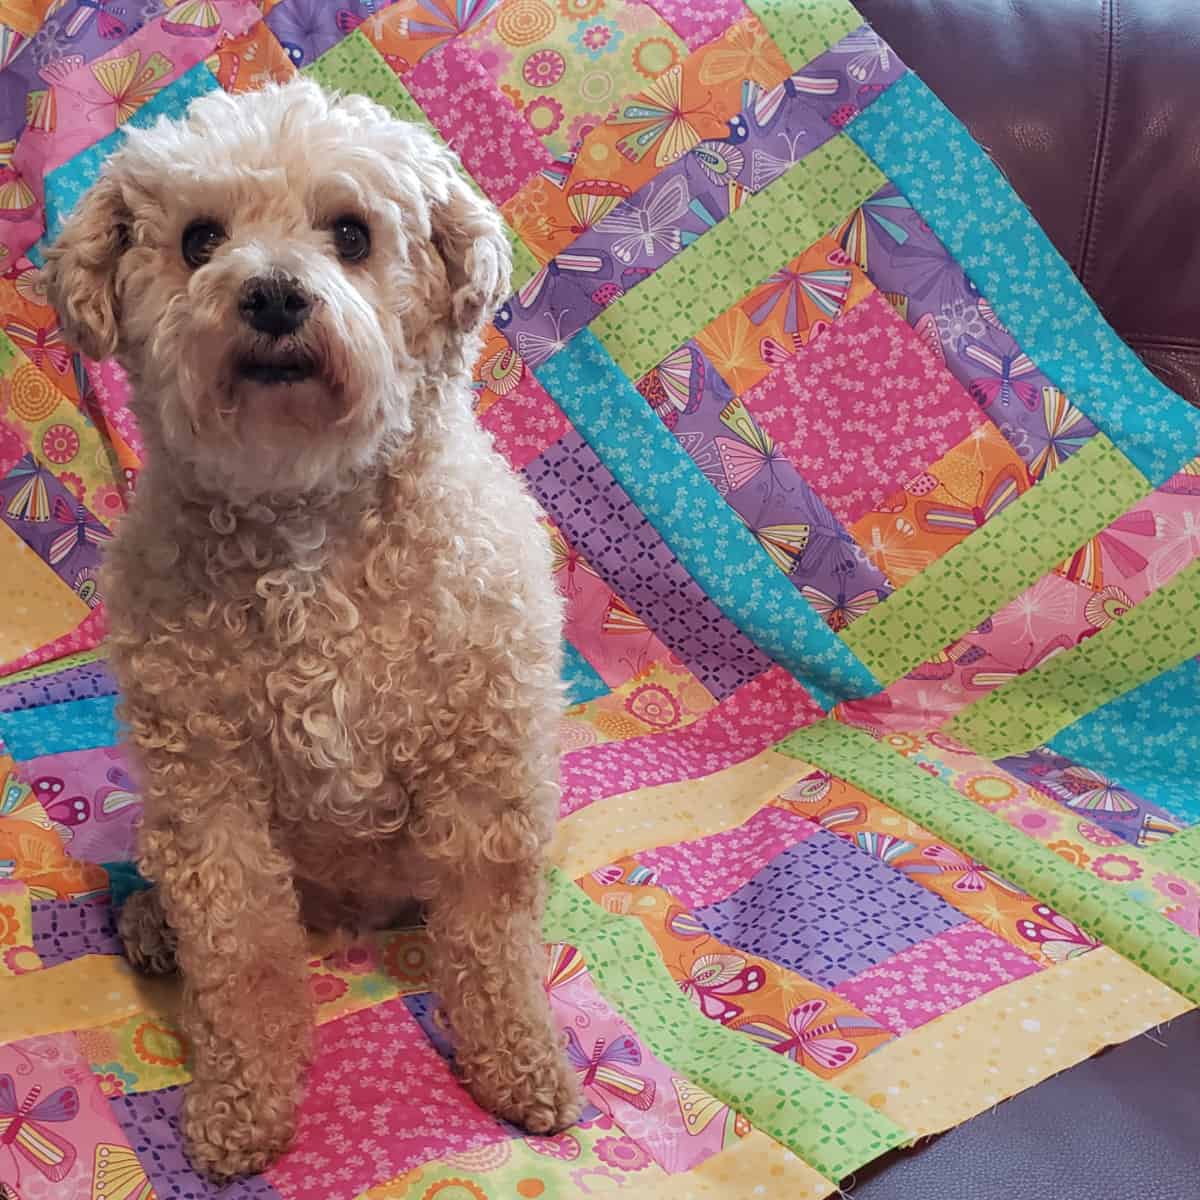 Cute photo of dog on quilt